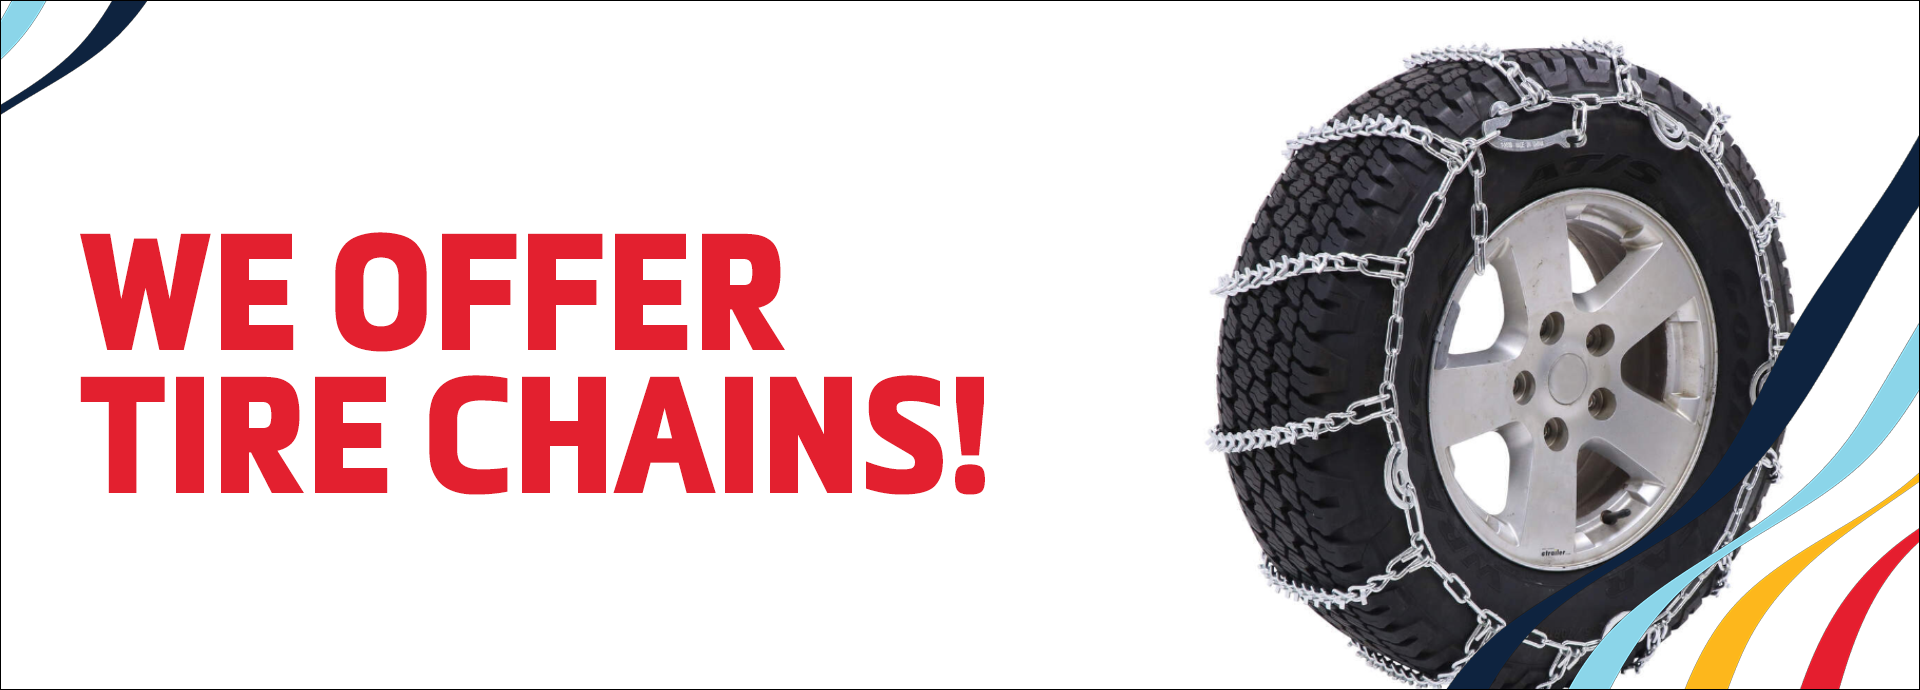 We offer Tire Chains!